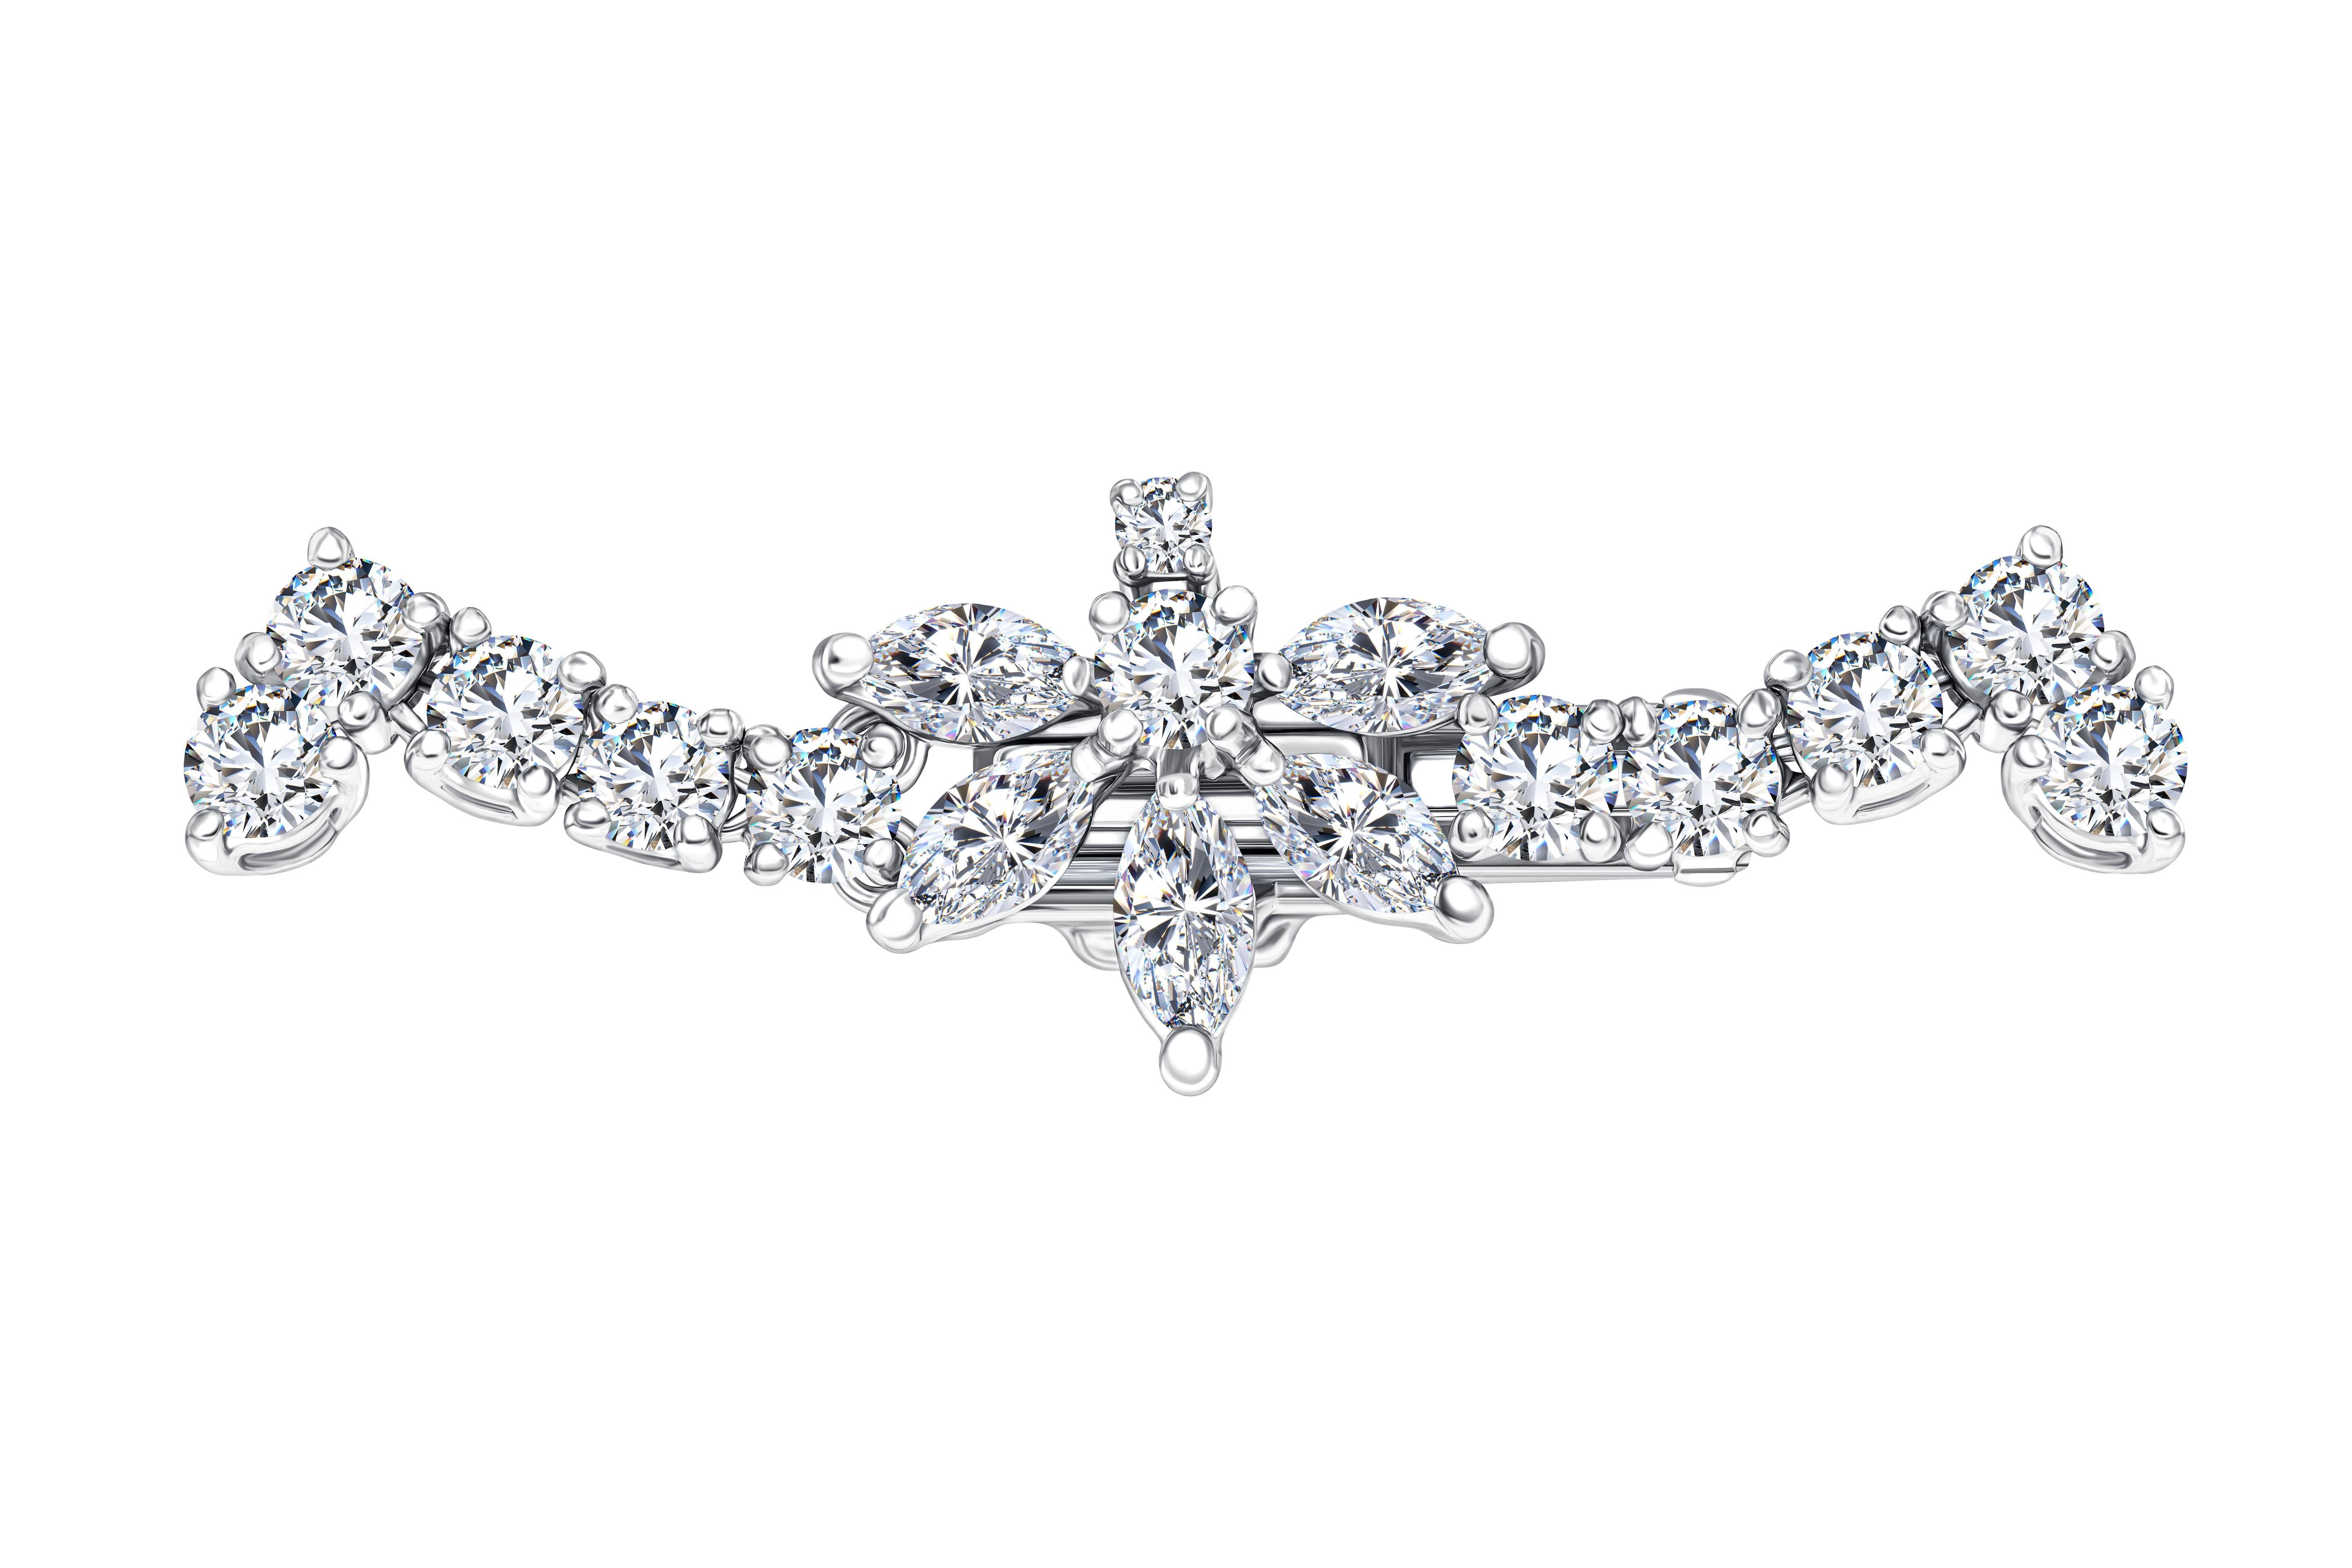 This astounding 32.03 Carat GIA Certified Fancy Diamond Necklace features 17 Pear Brilliant GIA Certified Diamonds Ranging from D to F in color and IF to VS1 in Clarity totaling 10.62 Carat which are situated around the necklace with 5.09 Carats of